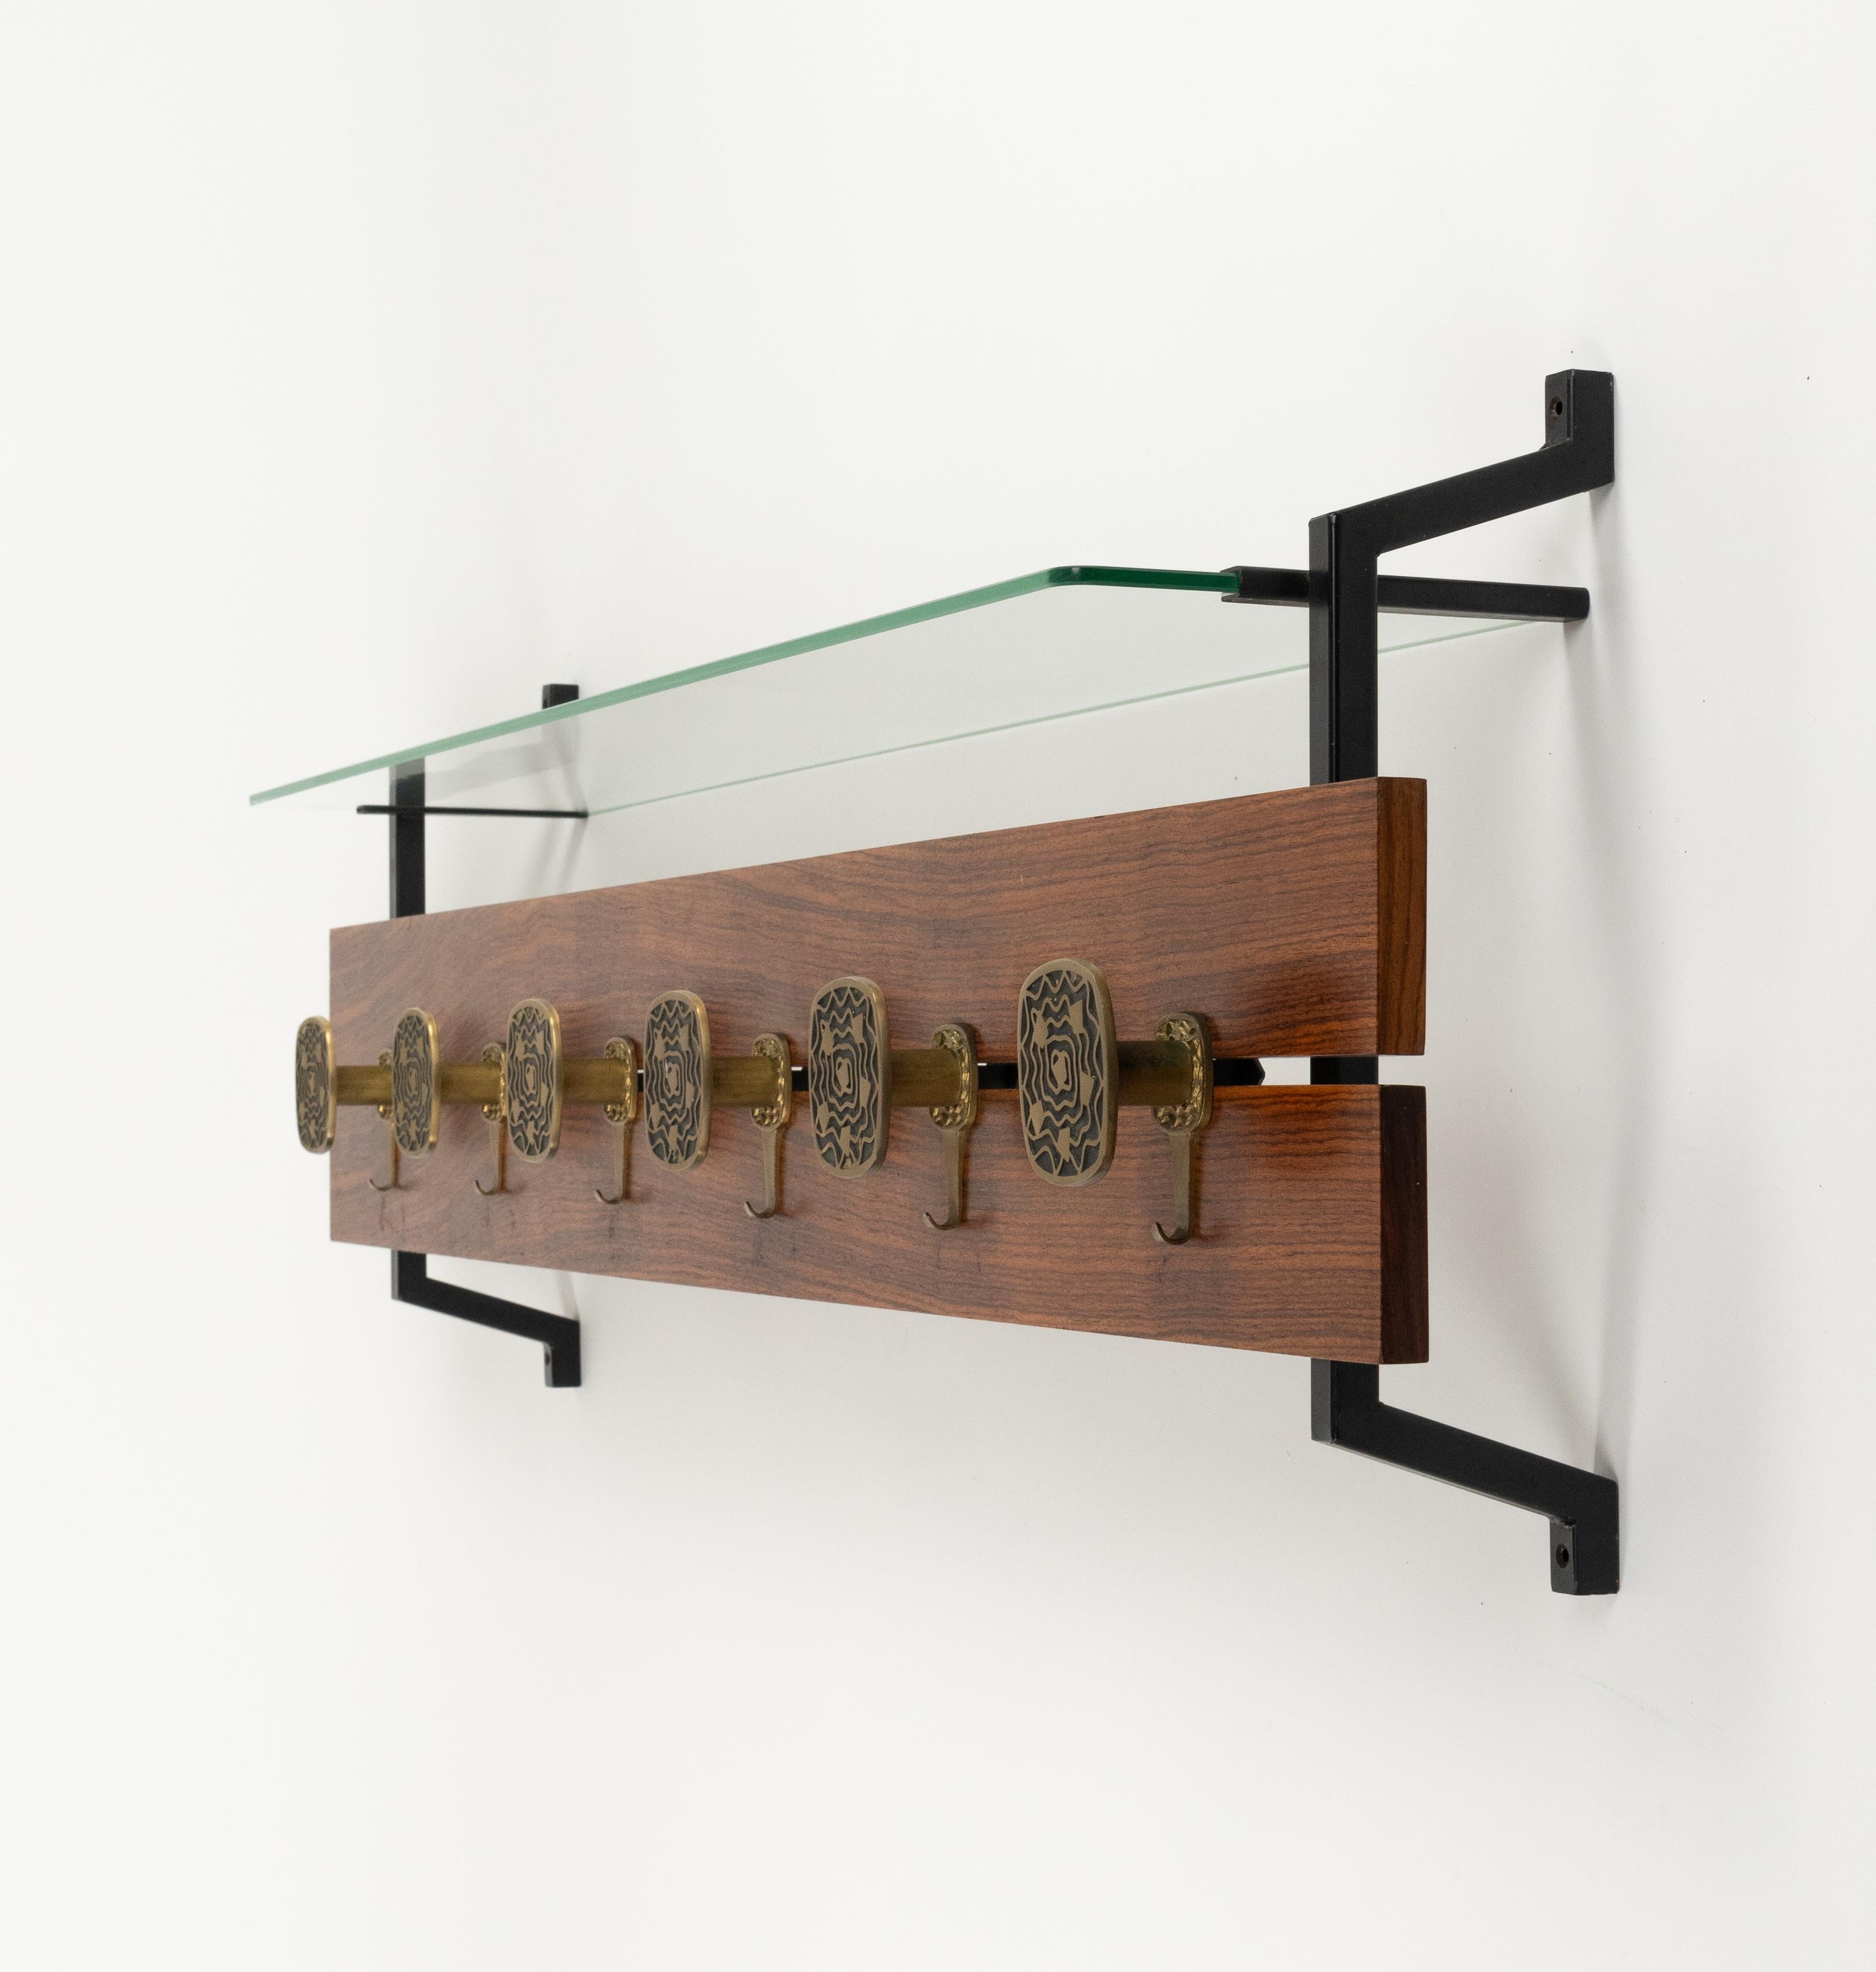 Midcentury Wood, Glass and Brass Coat Rack Herta Baller Style, Italy 1970s For Sale 2